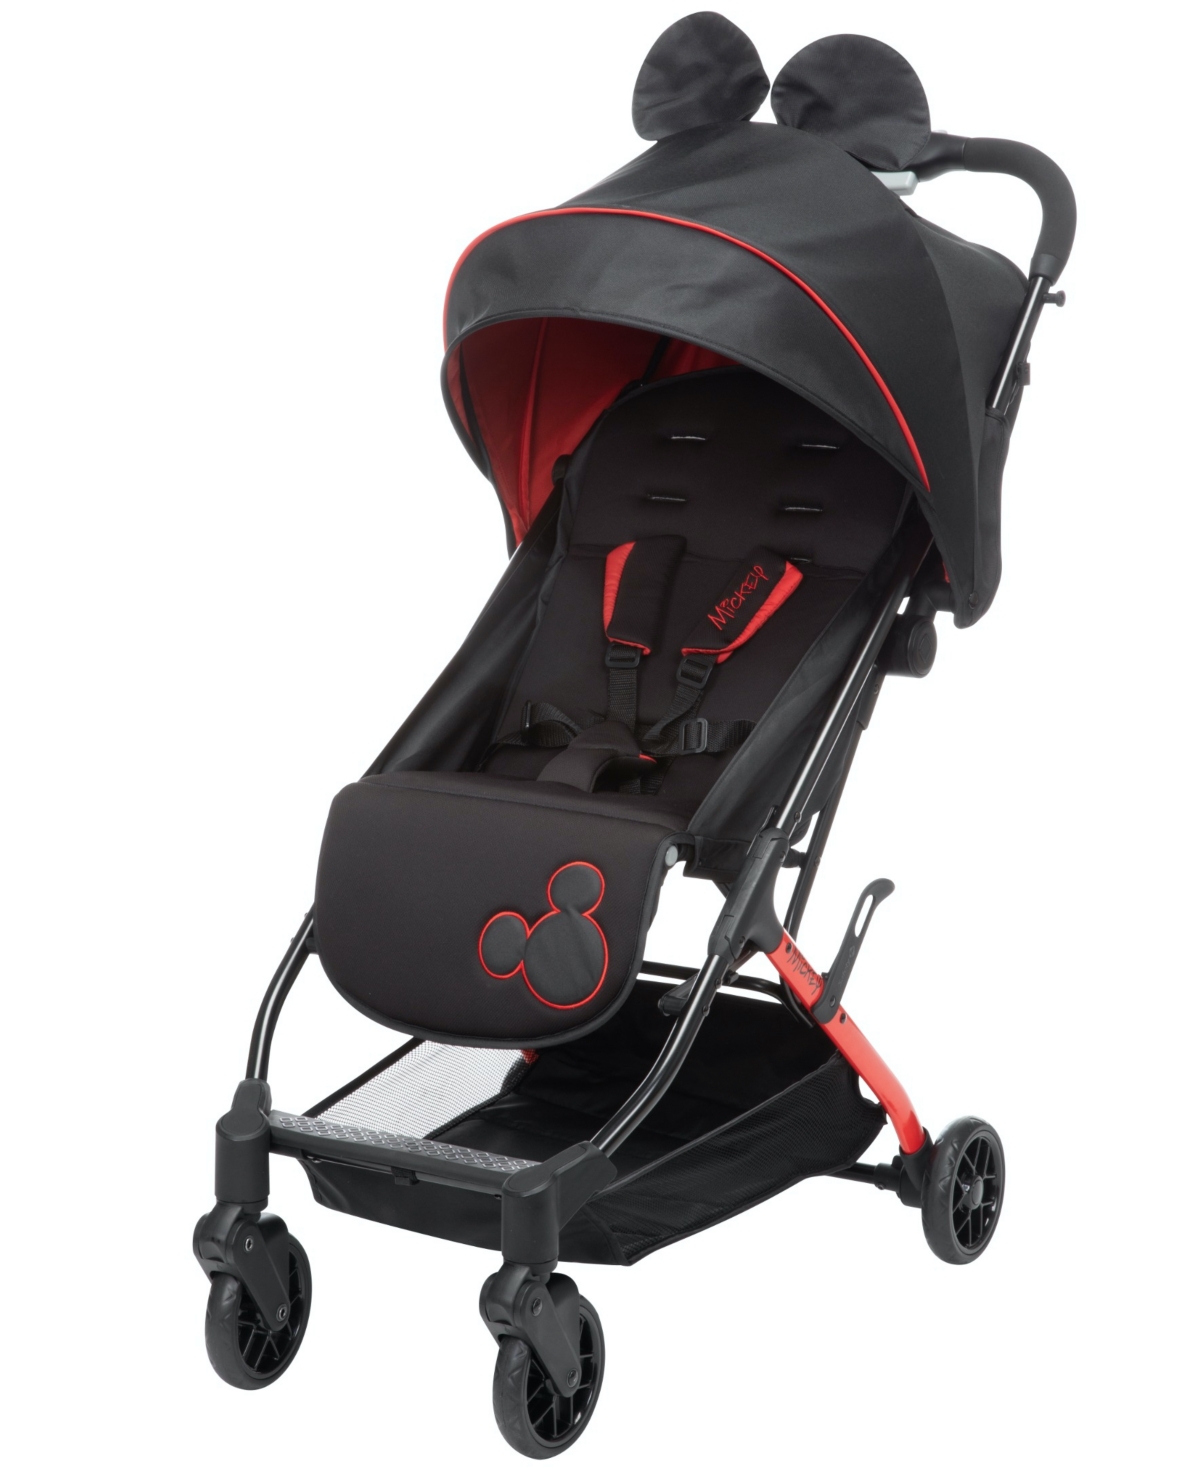 Disney Baby Teeny Ultra Compact Stroller In Let's Go Mickey